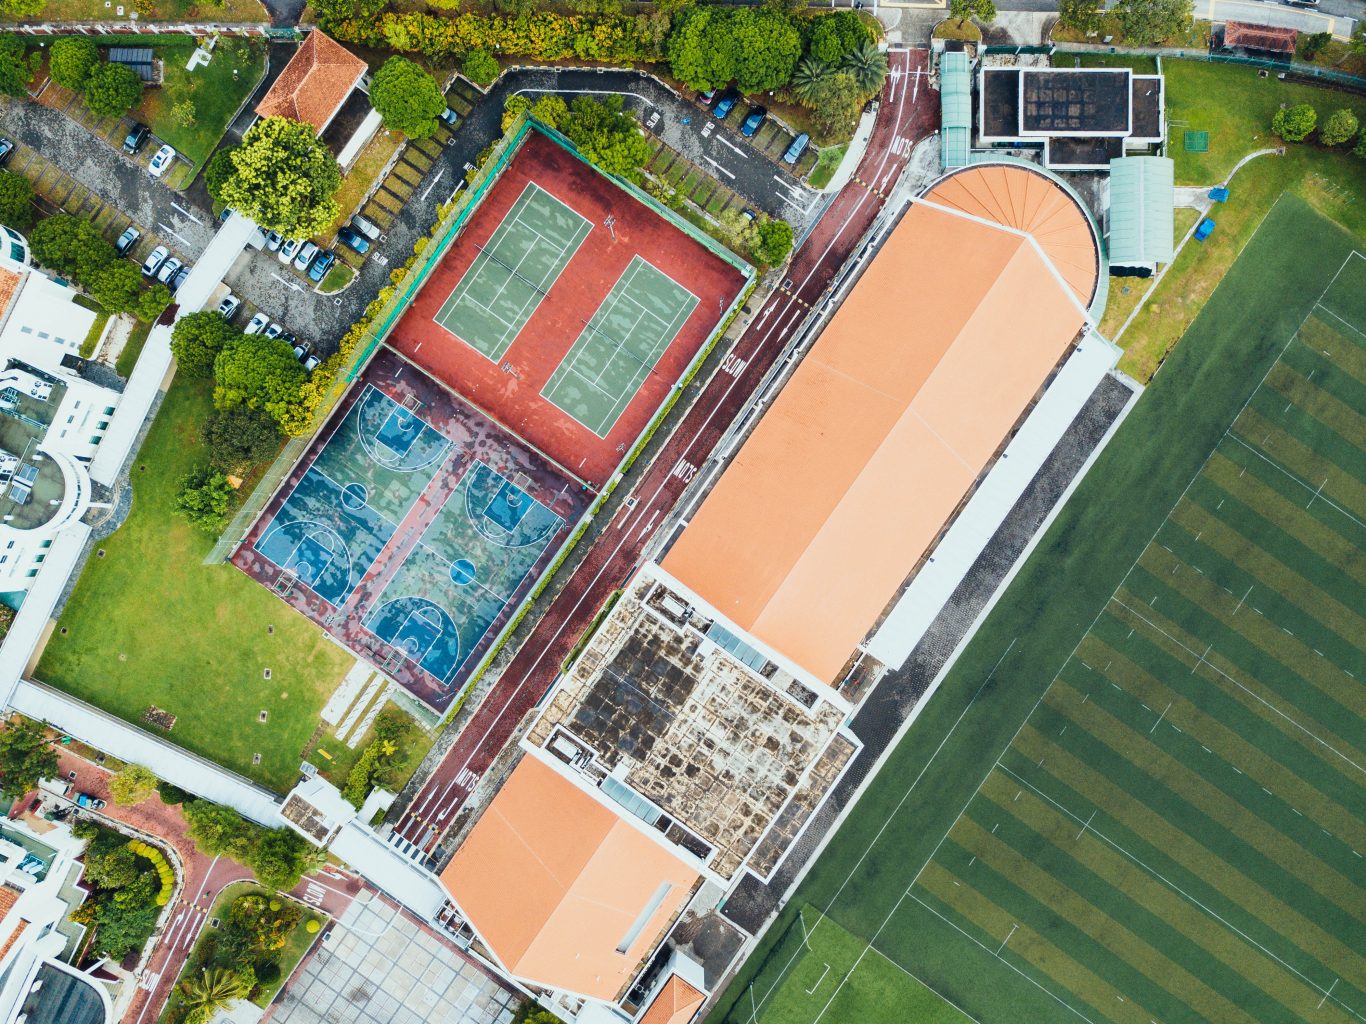 school view from above